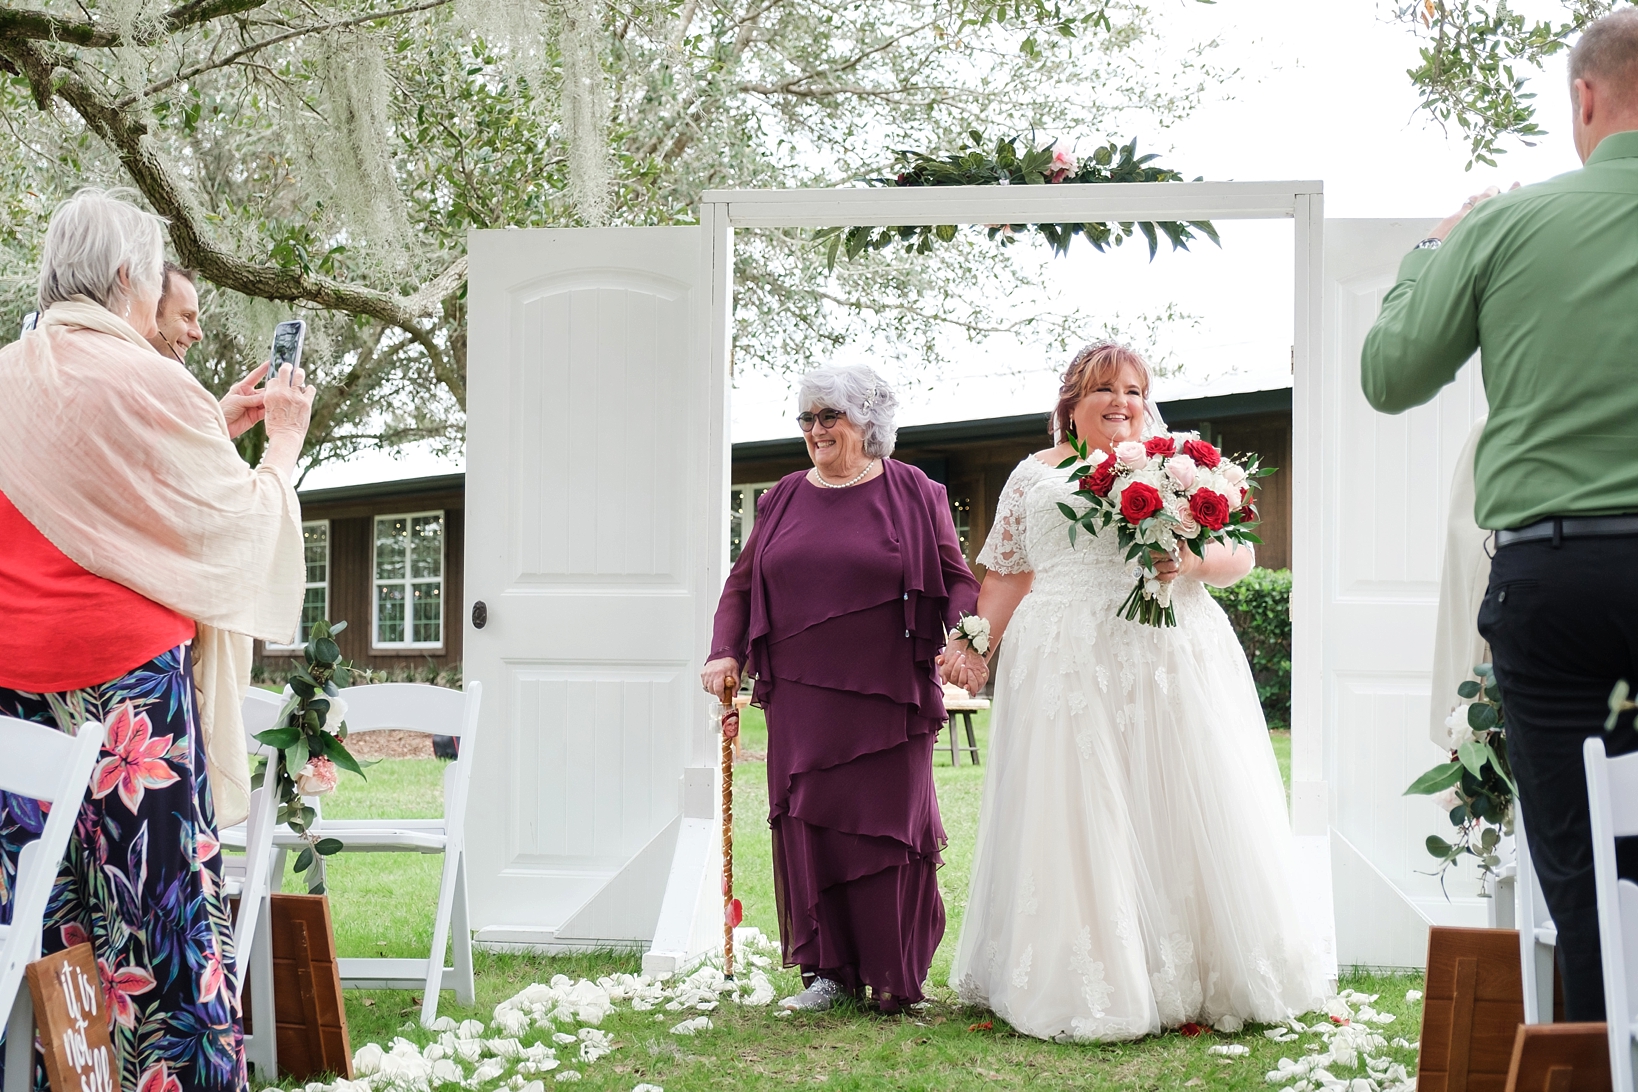 Bride and her Mother walk down the aisle together during her cross creek wedding celebration